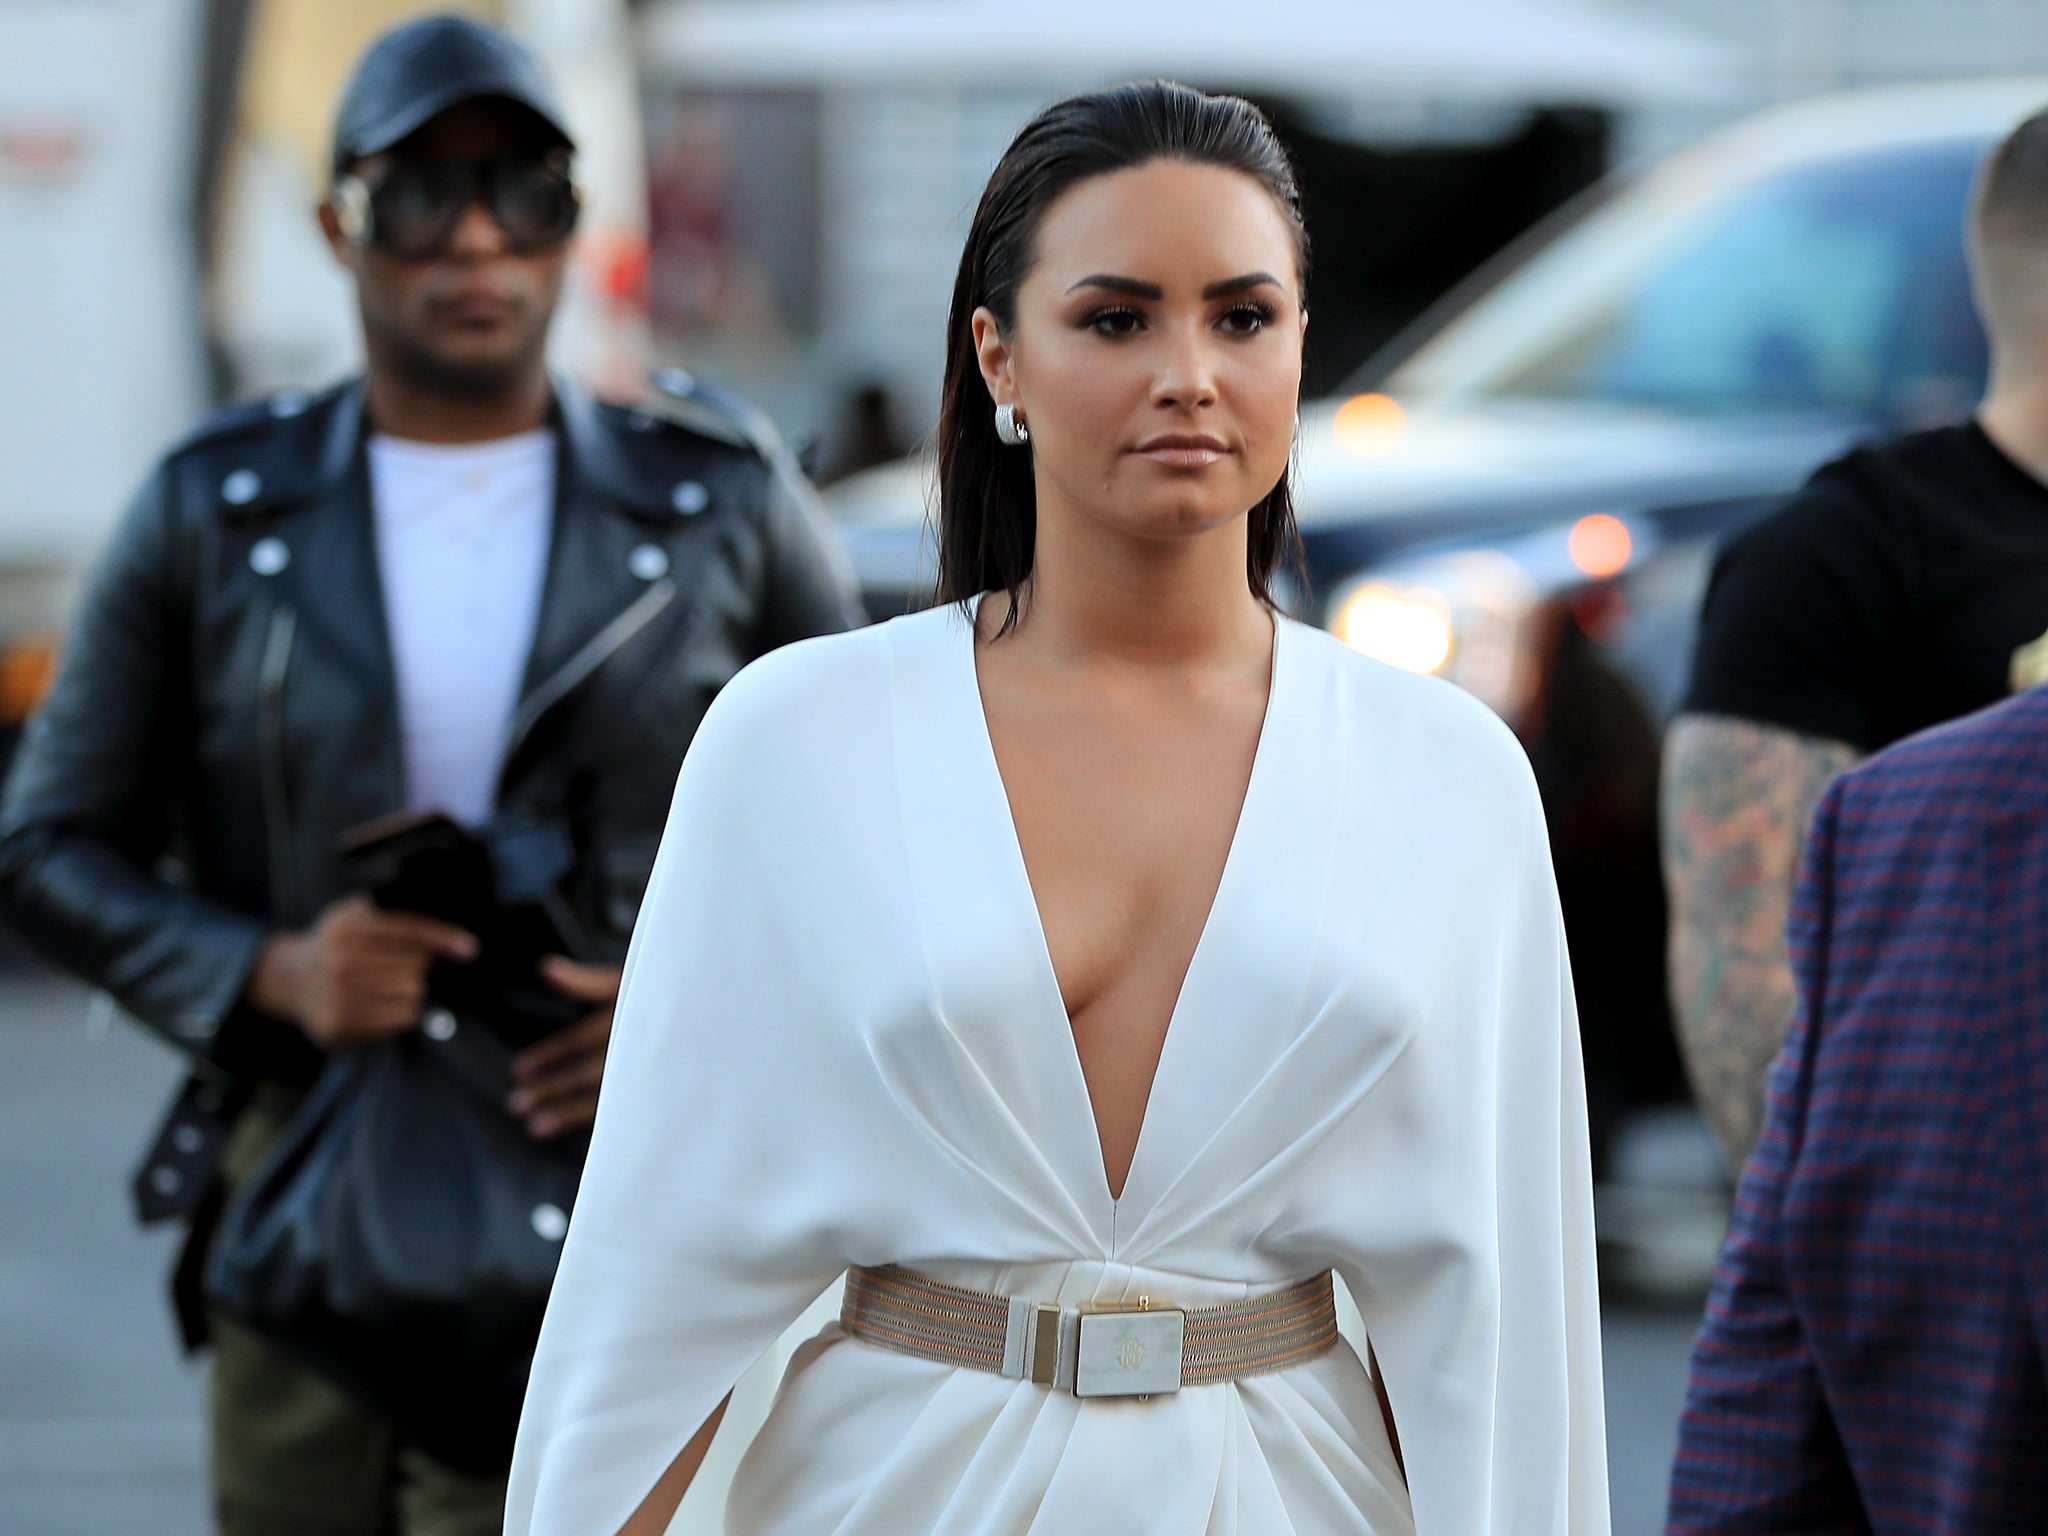 Demi Lovato said she 'played a prank' on her bodyguard that involved nonconsensual groping